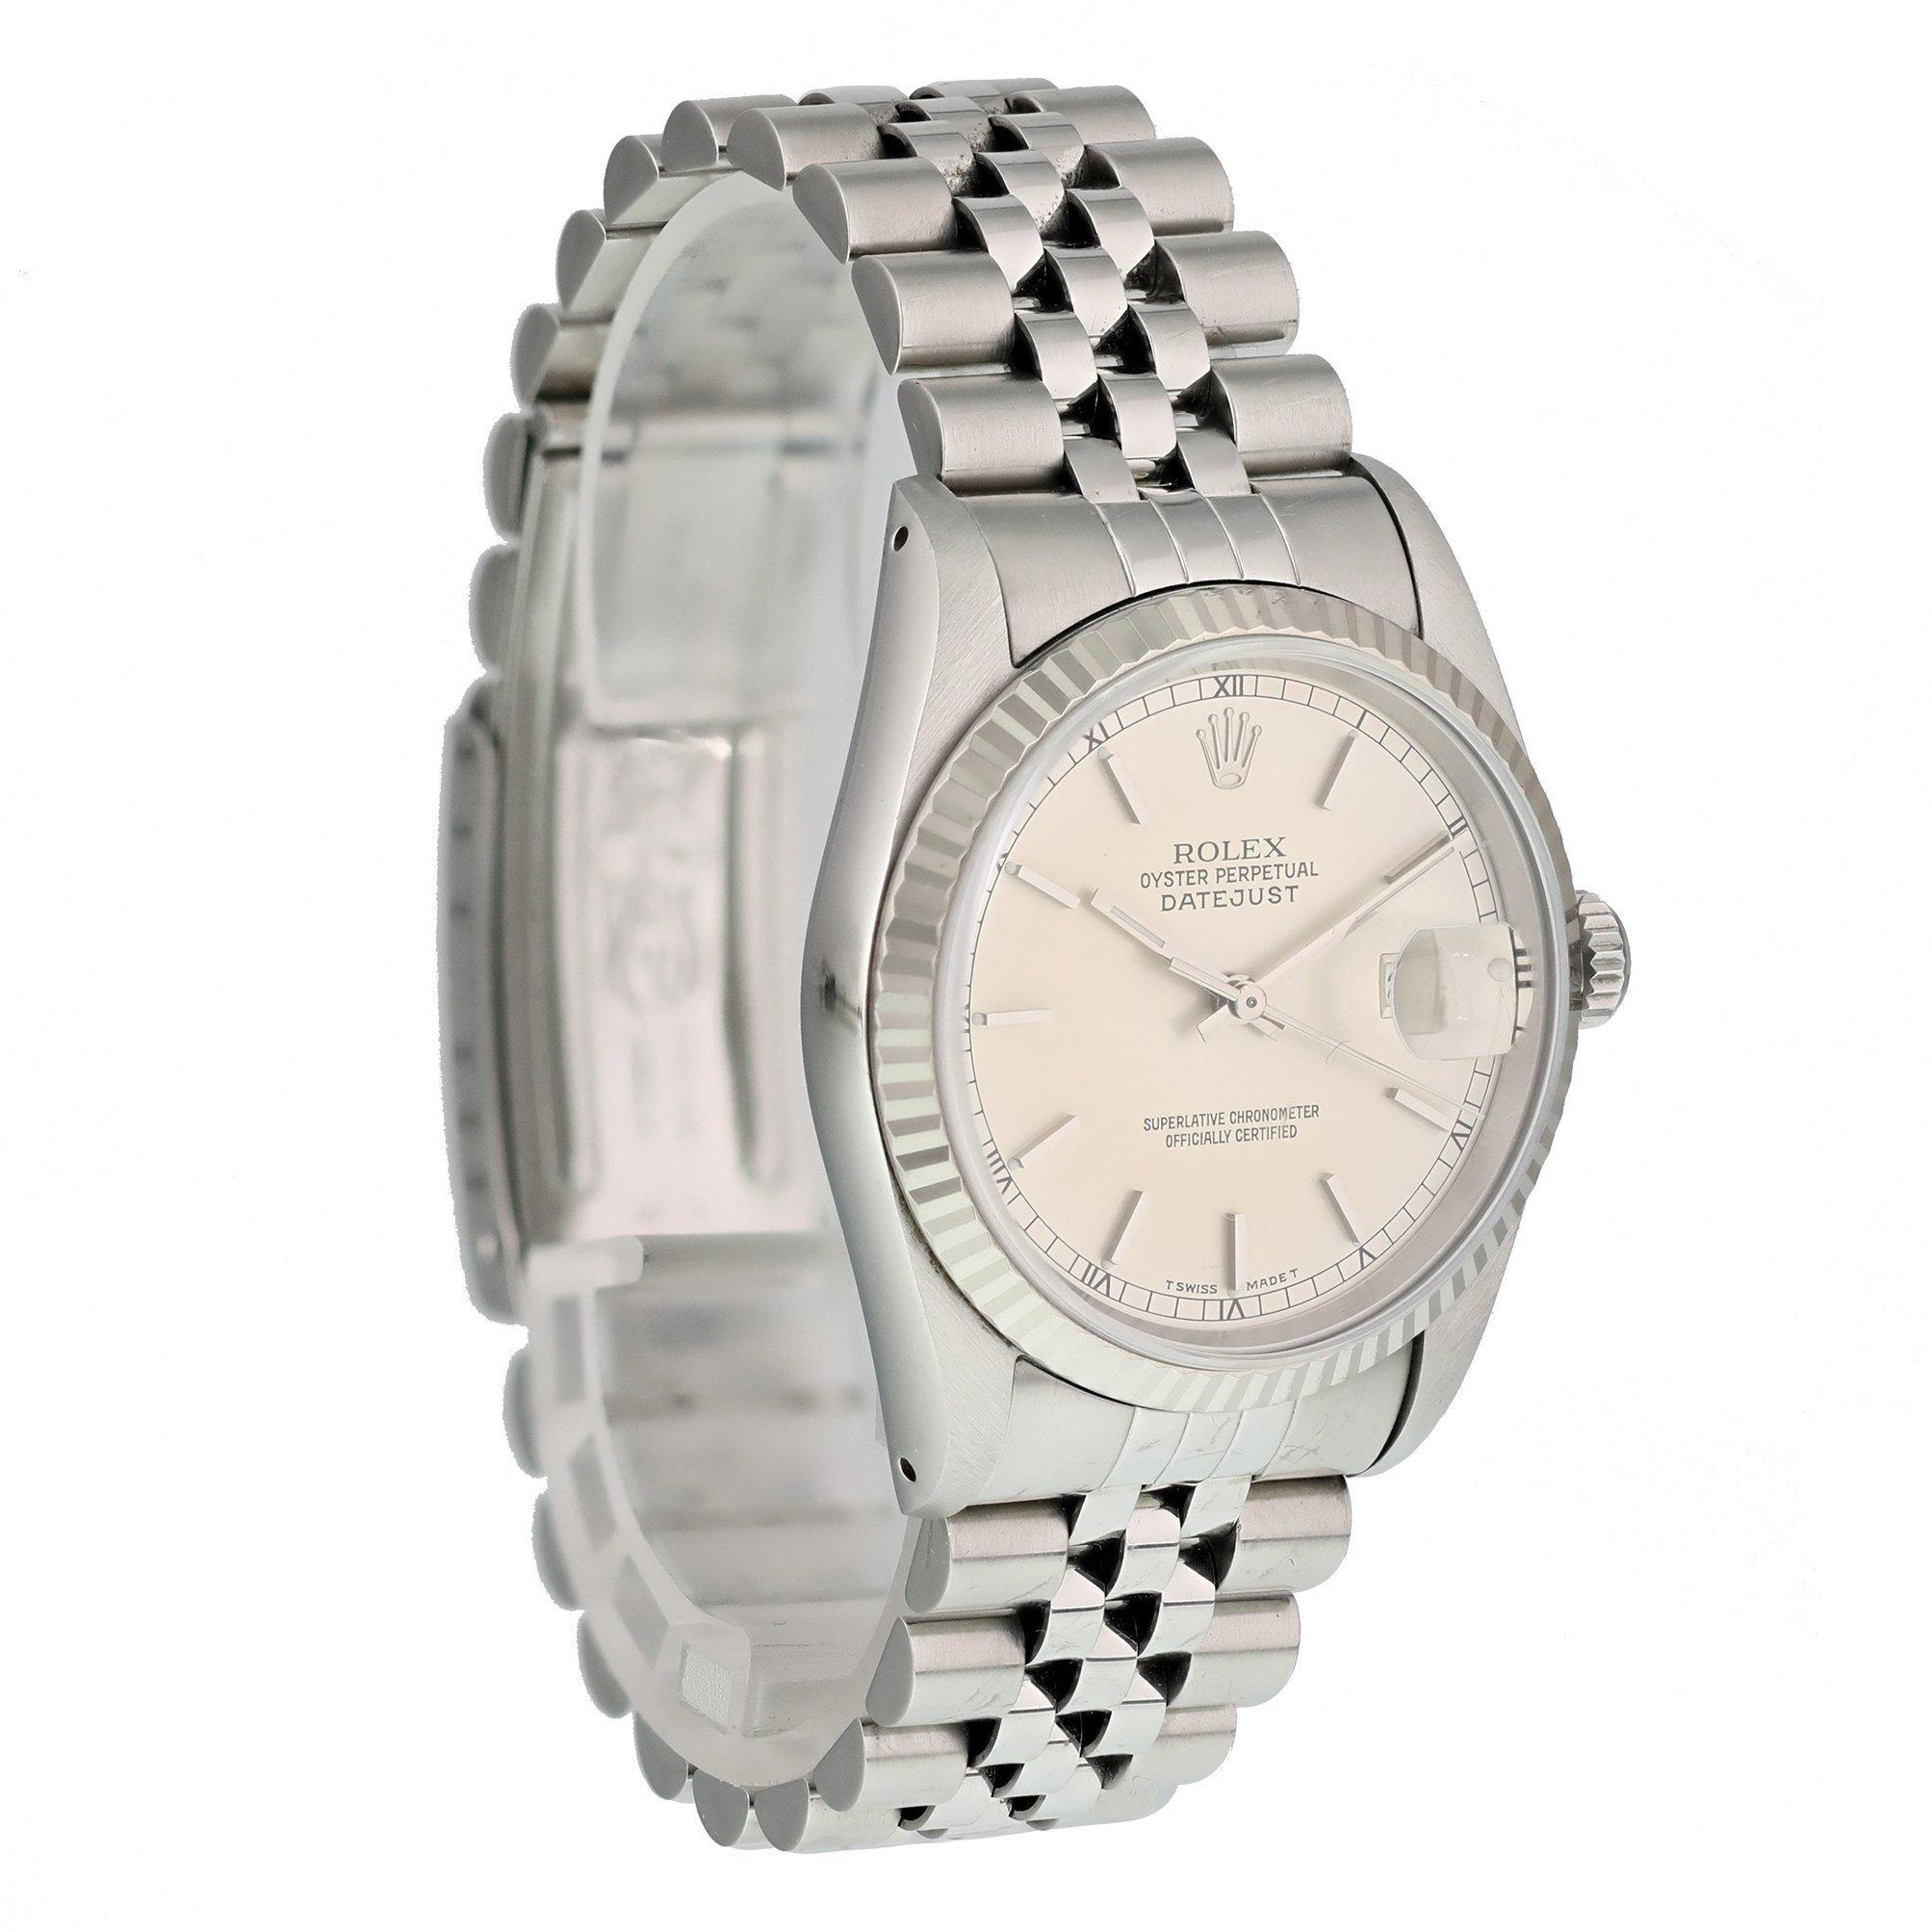 Rolex Oyster Perpetual Datejust 16014 Men's Watch For Sale 1